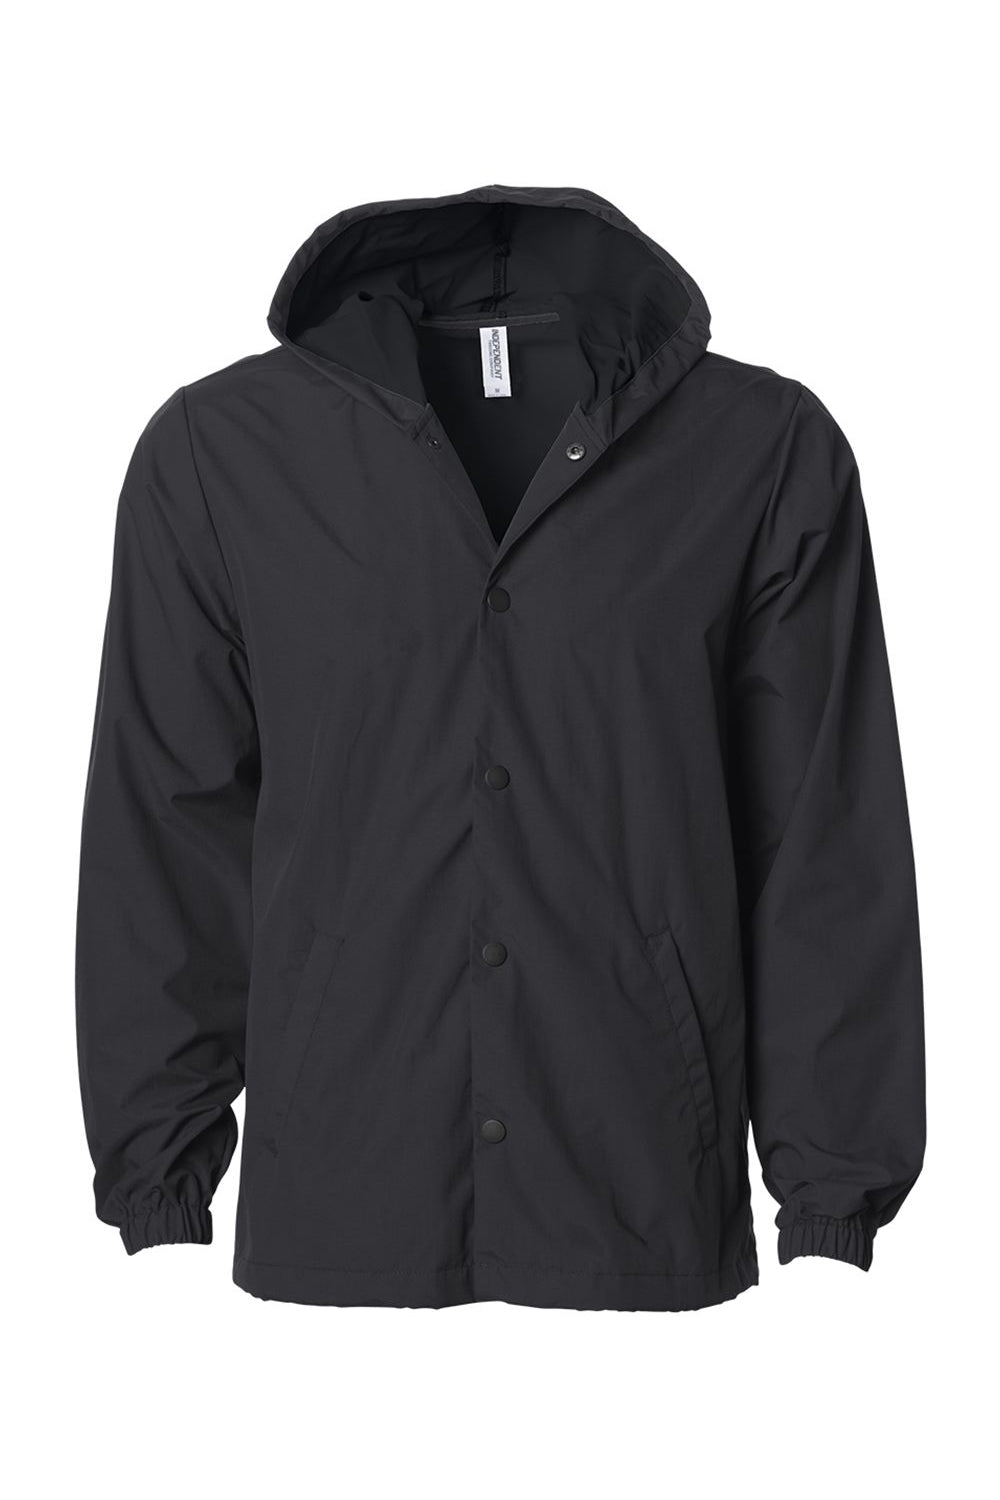 Independent Trading Co. EXP95NB Mens Water Resistant Snap Down Hooded Windbreaker Jacket Black/Black Flat Front